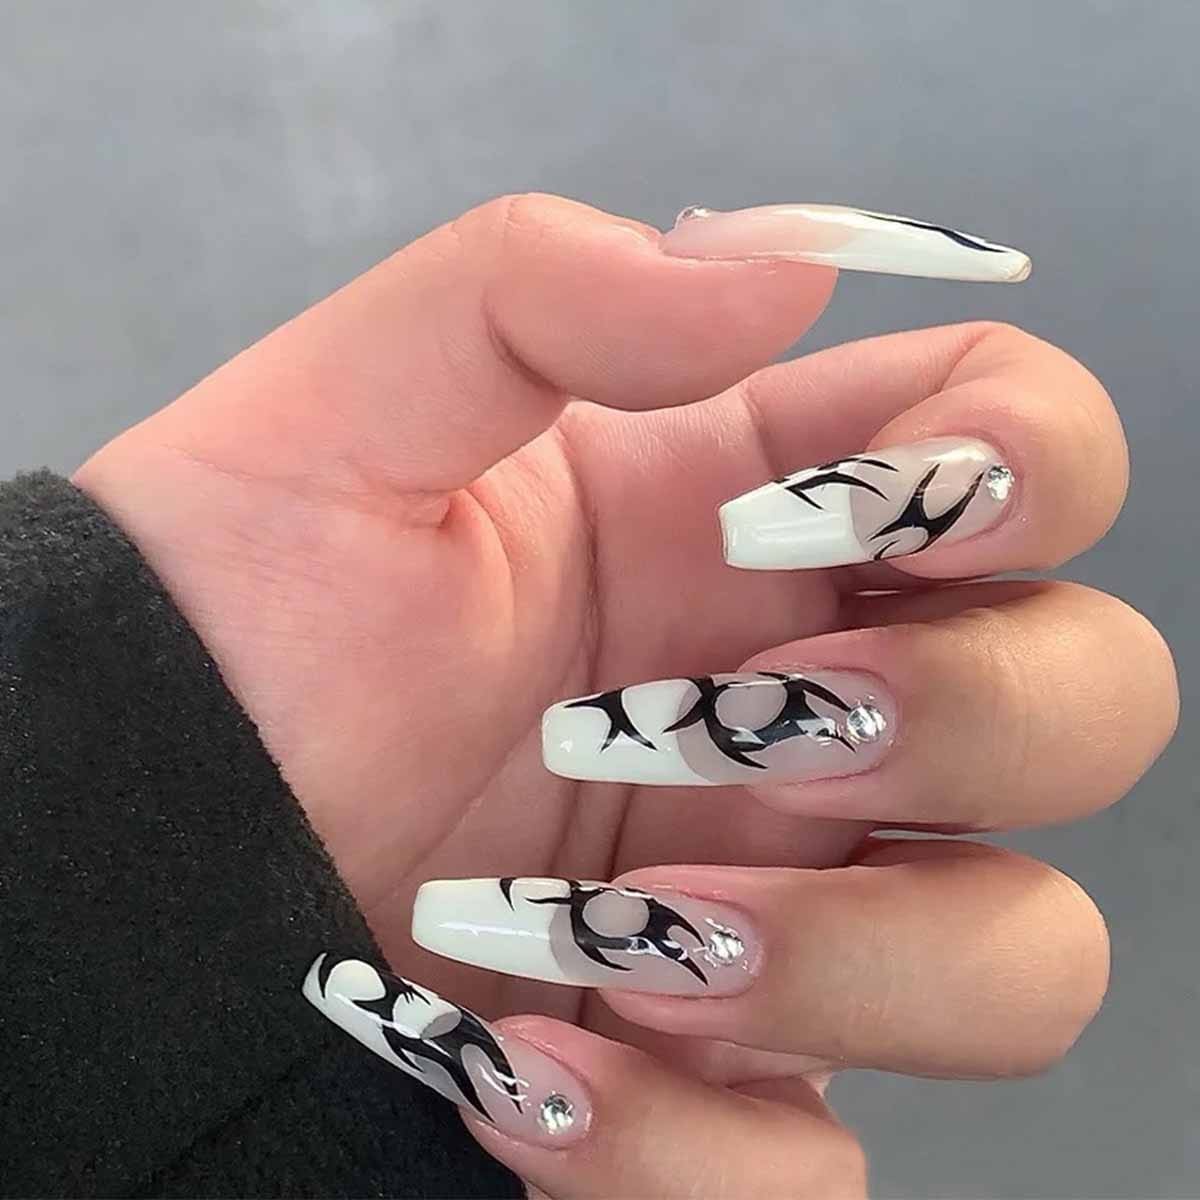 Occult Press On Nails - 5 - nails